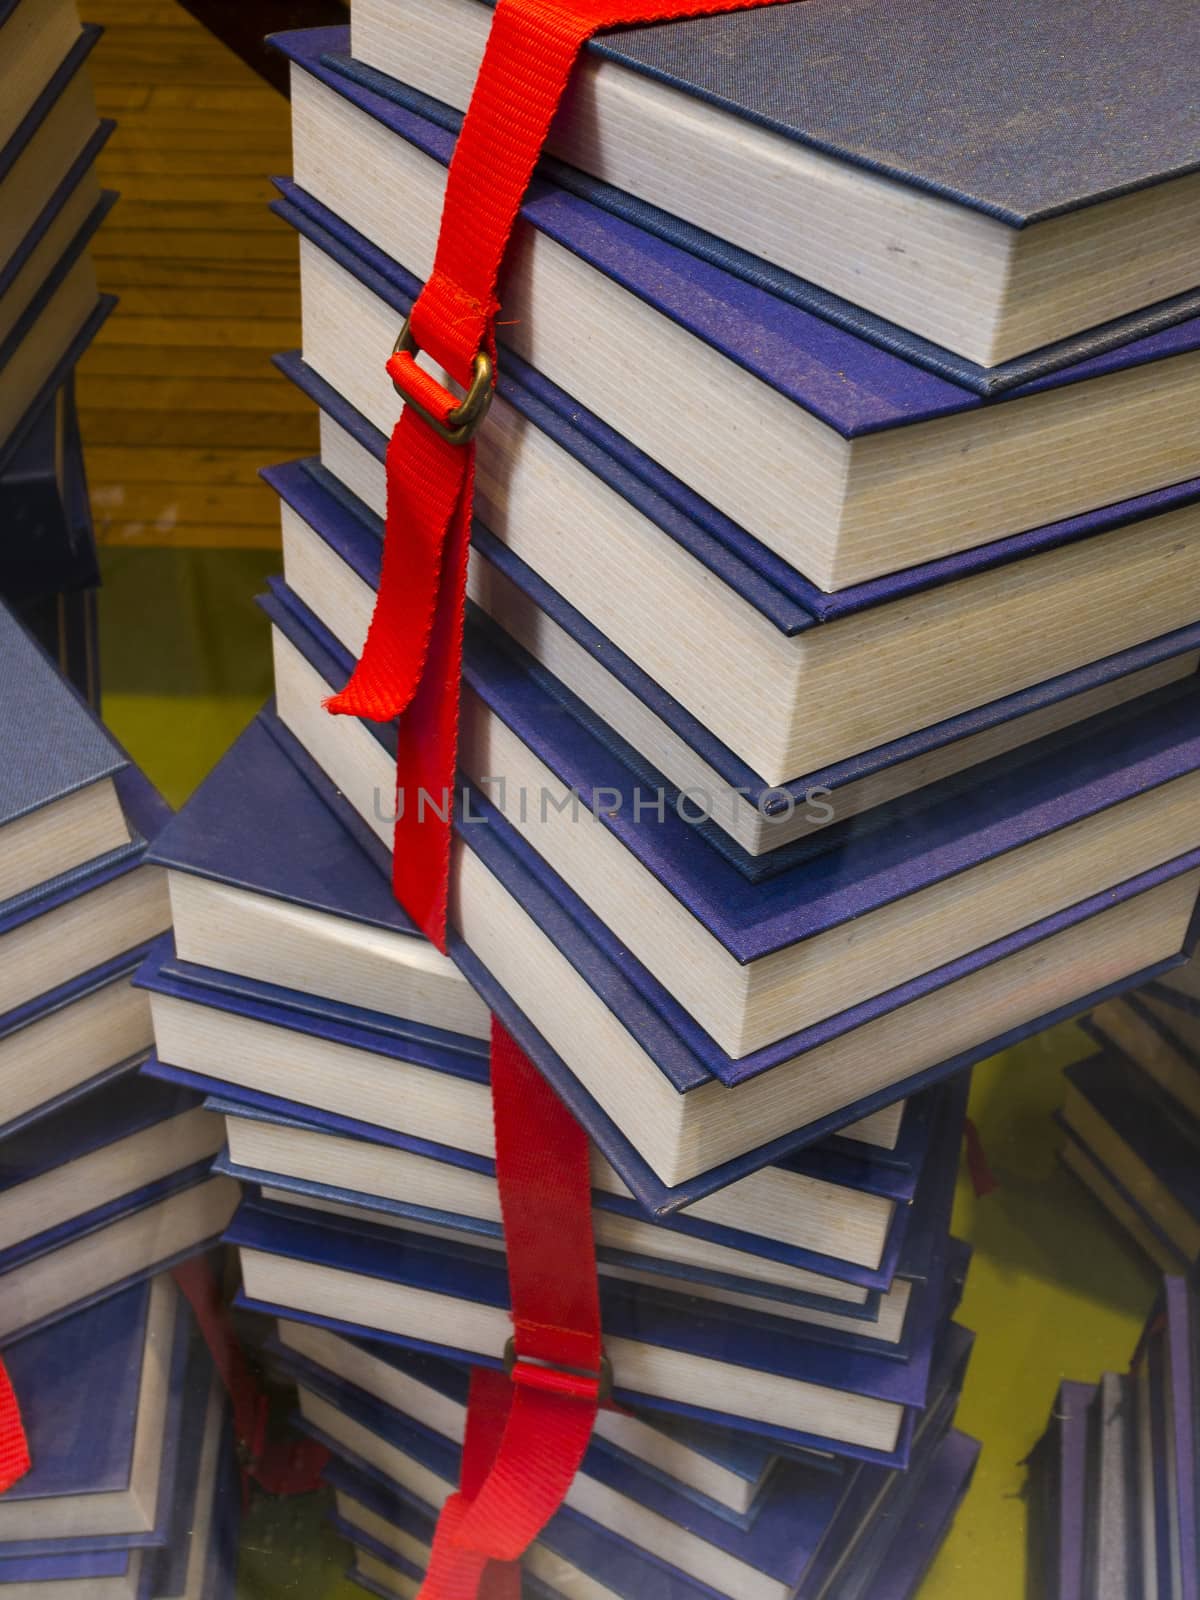 stacked books by f/2sumicron